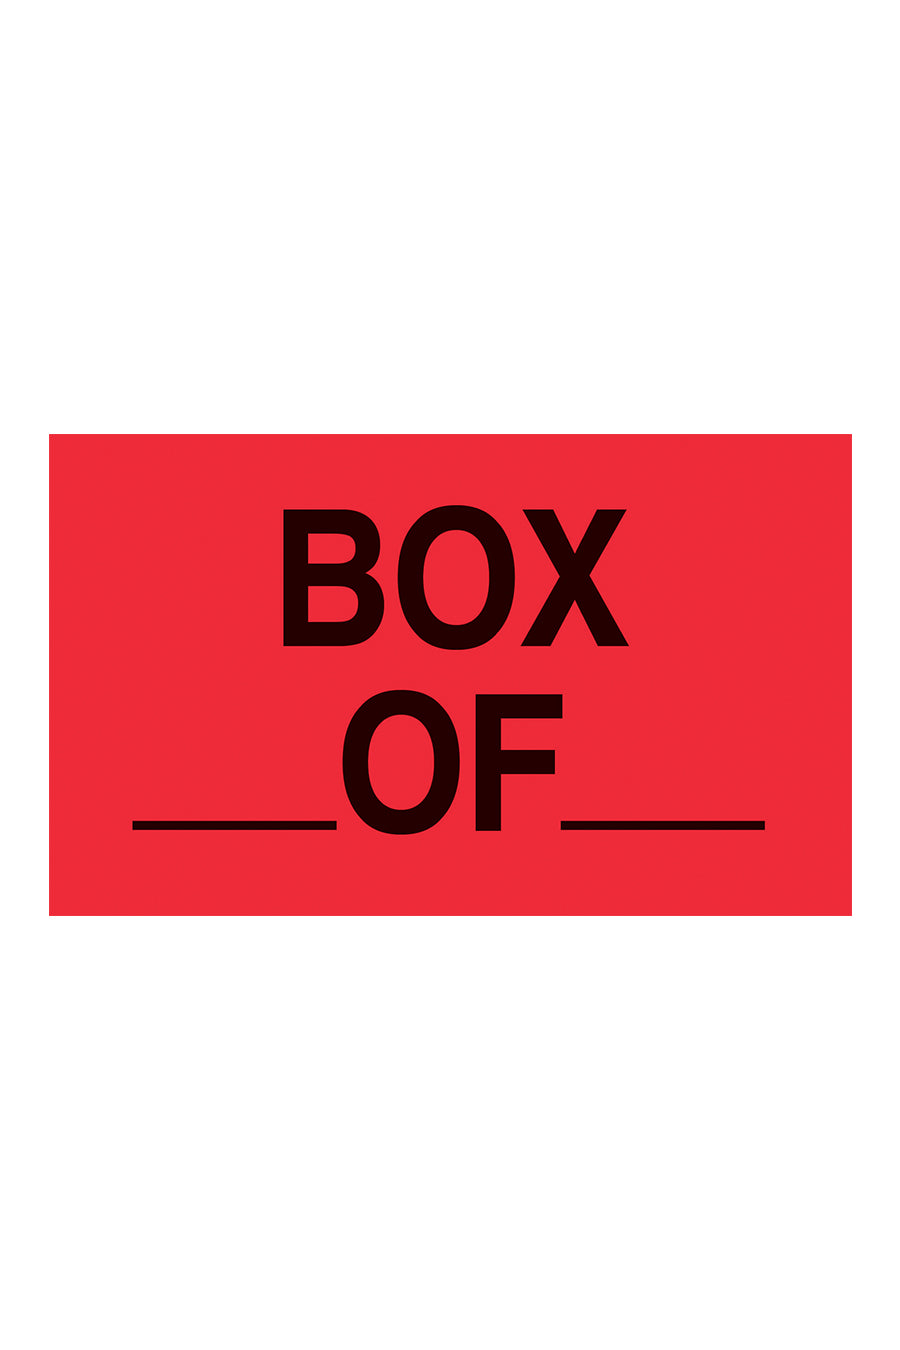 "Box ____ Of ____", 3" x 5", Fluorescent Red, 500 Labels/Roll